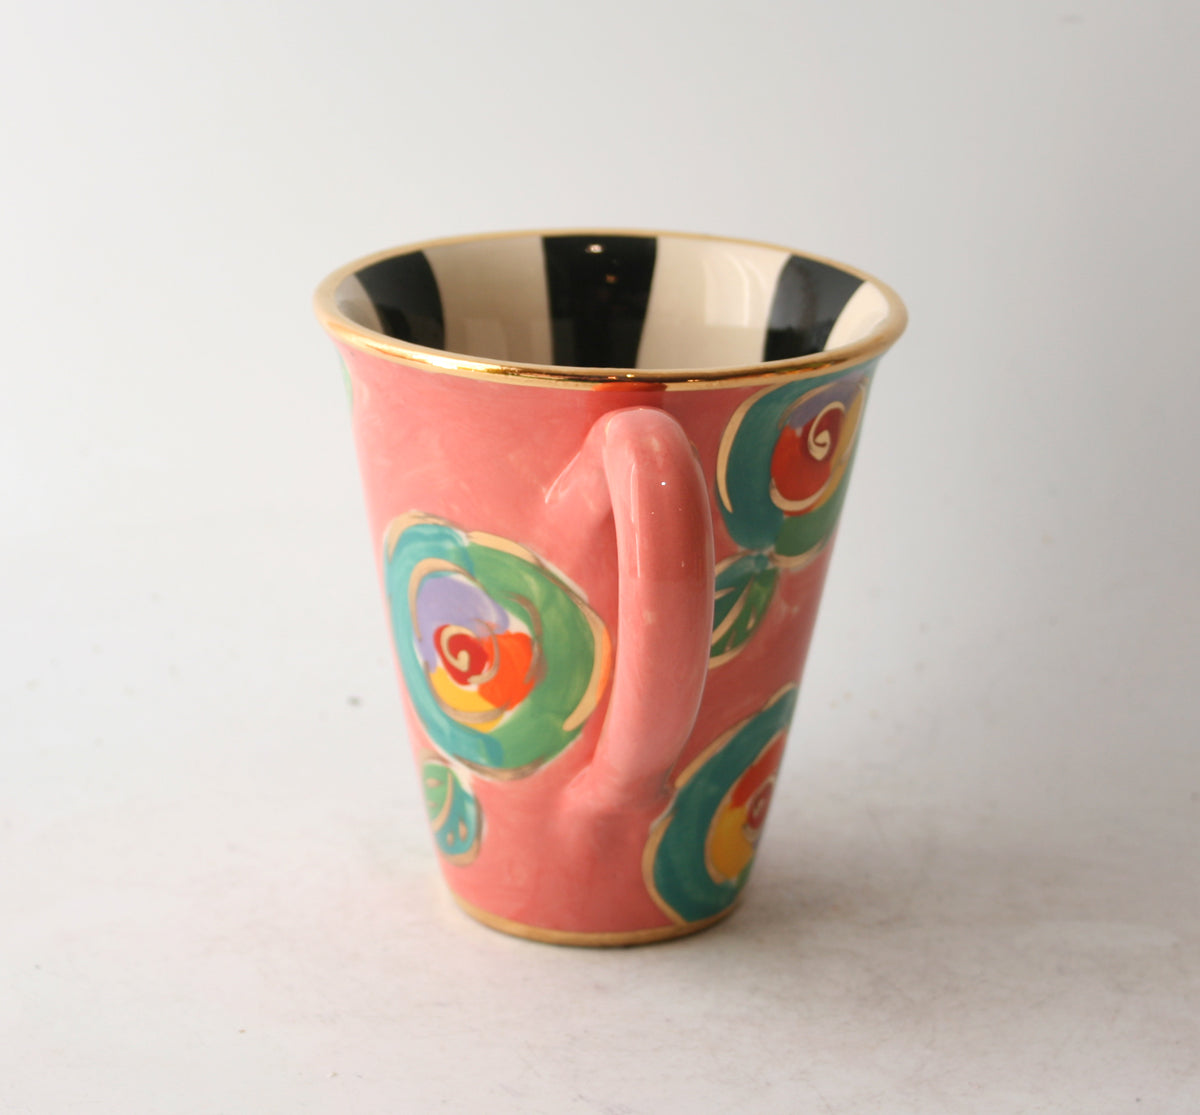 New Shape Large Mug in New Rose Pink with Black and White Stripes